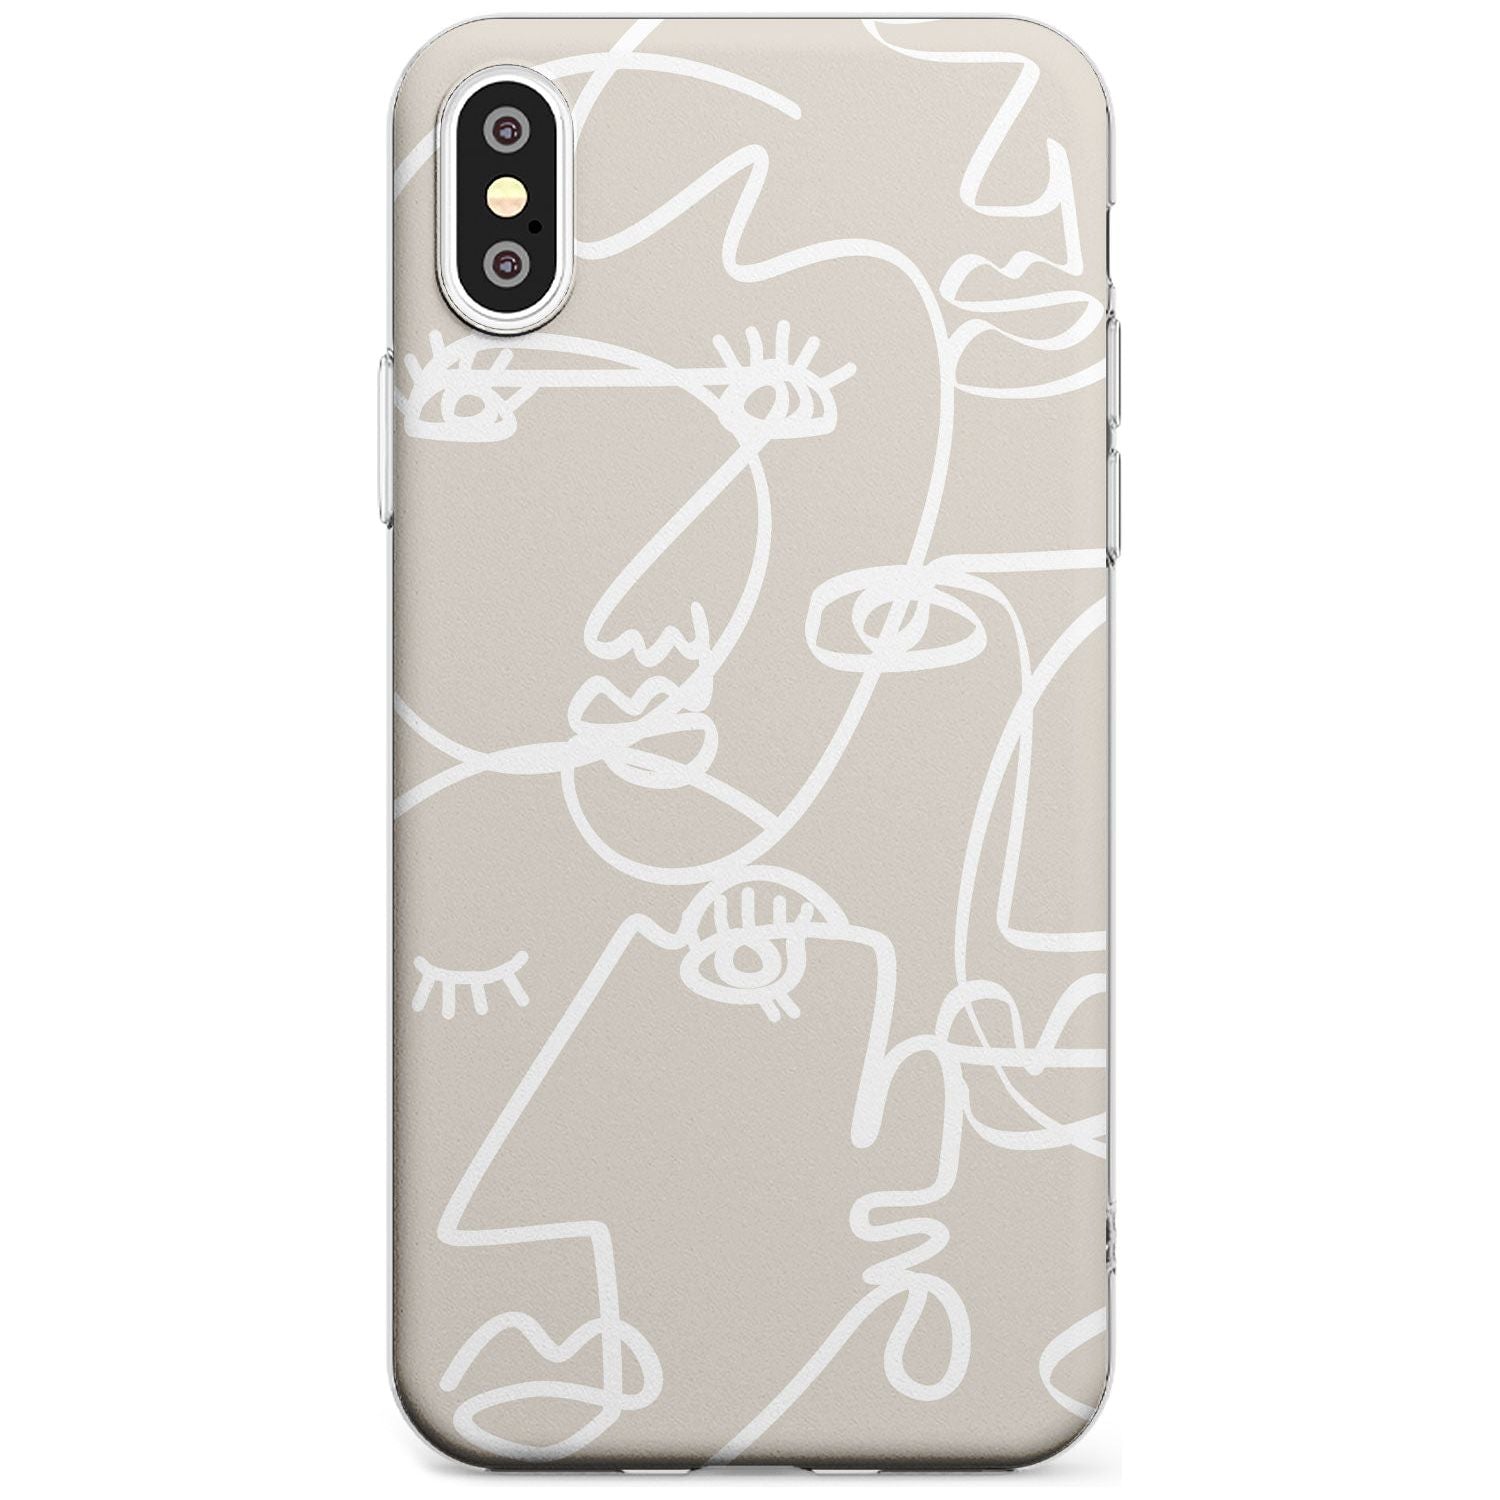 Continuous Line Faces: White on Beige Black Impact Phone Case for iPhone X XS Max XR